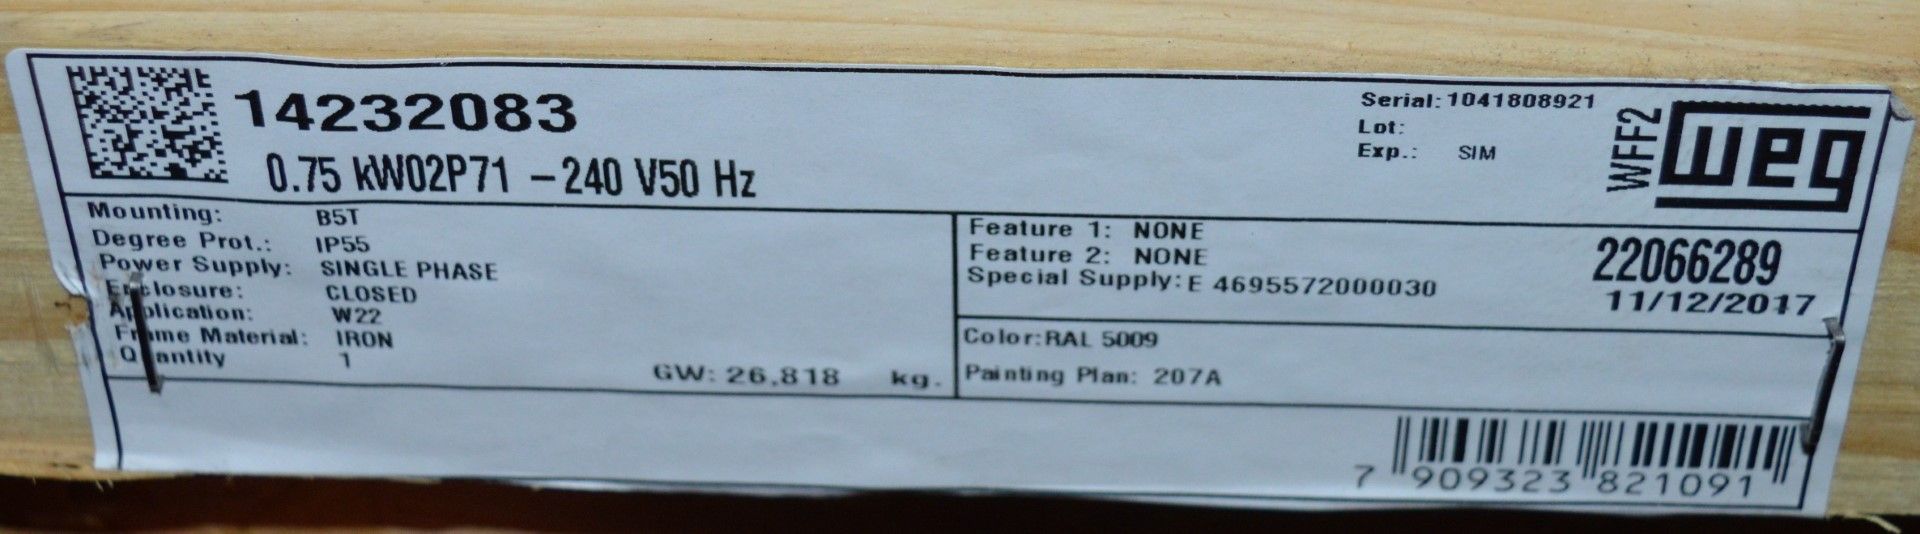 1 x Weg W22 240v IP55 Single Phase Electric Motor - New and Boxed - CL295 - Location: Altrincham - Image 3 of 8